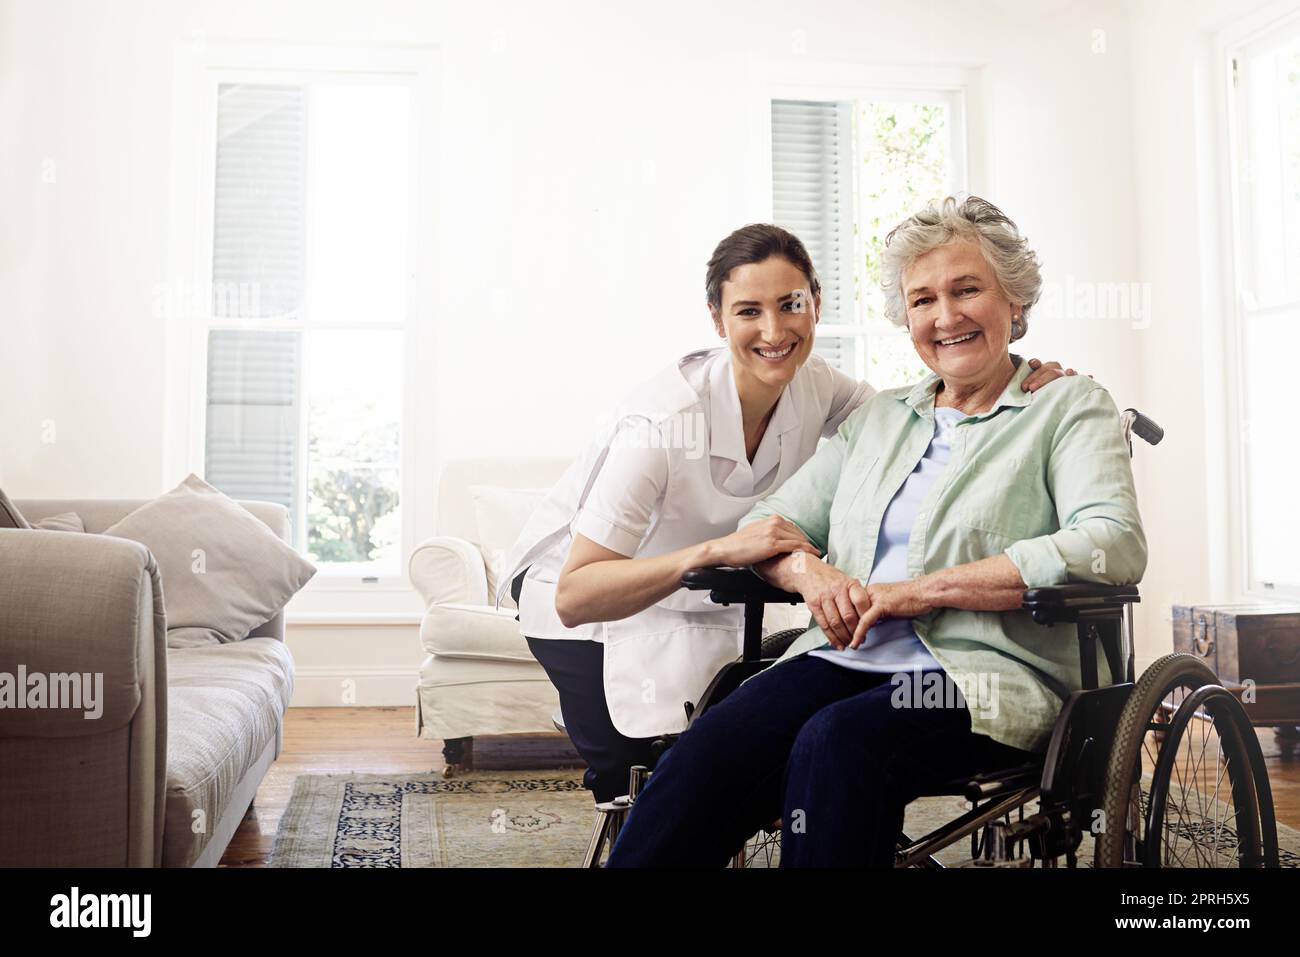 Support with a smile. Portrait of a smiling caregiver and a senior woman in a wheelchair at home. Stock Photo